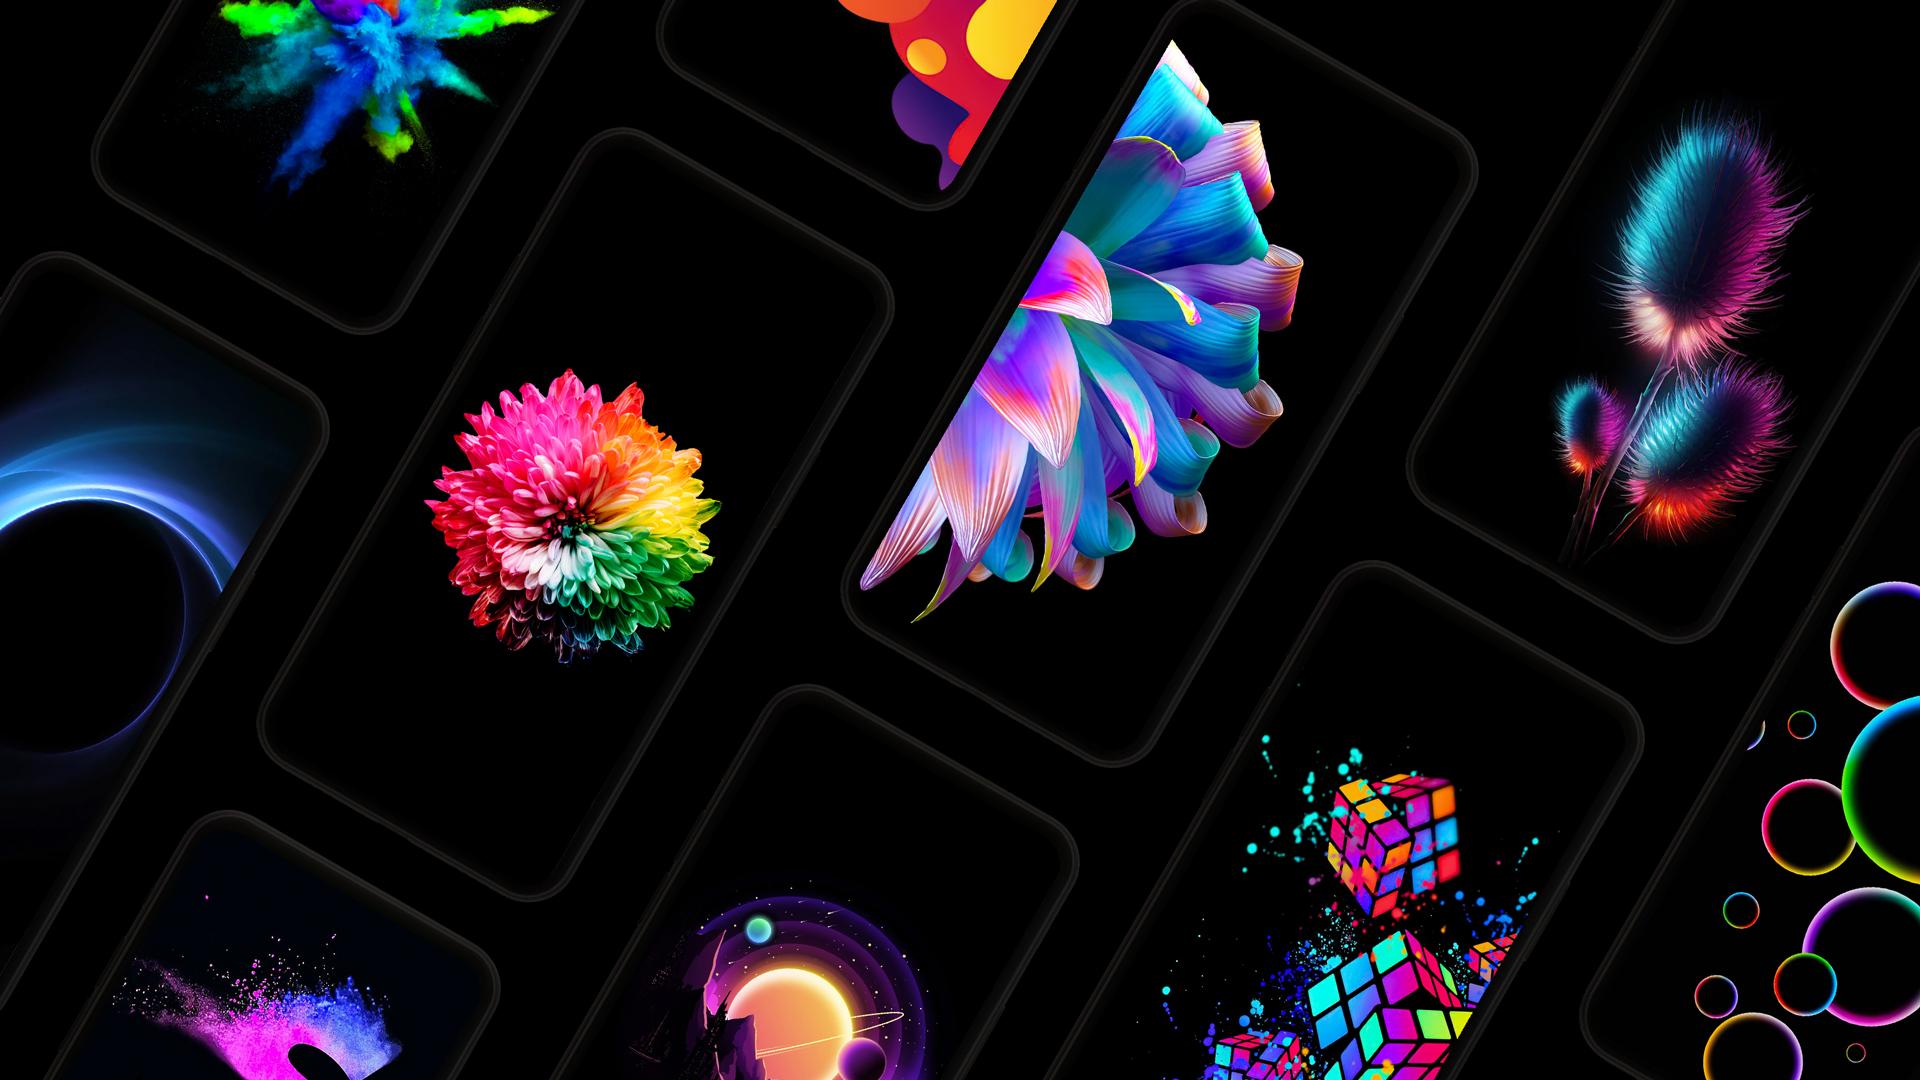 141+ Amoled HD Wallpapers in 1080P Laptop Full HD, 1920x1080 Resolution  Backgrounds and Images